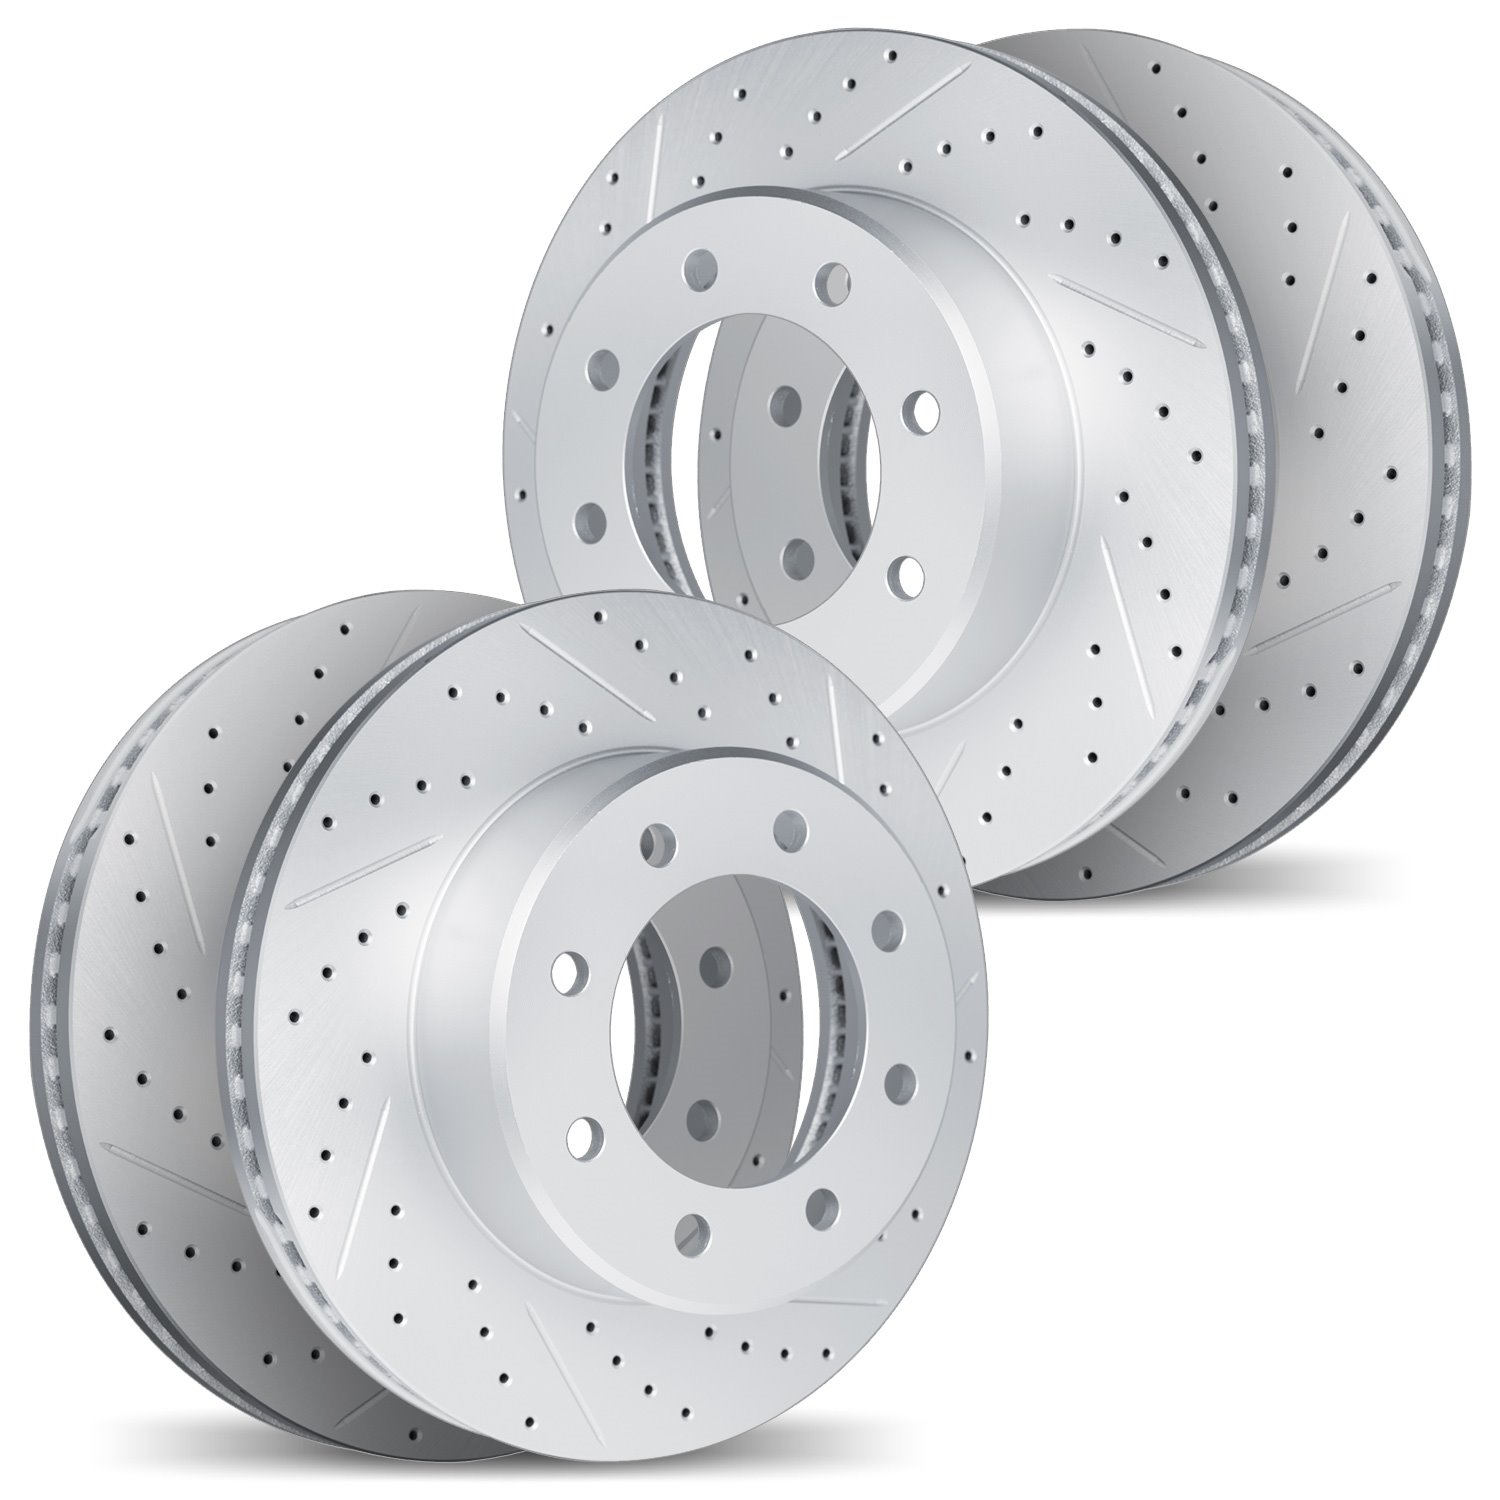 2004-54025 Geoperformance Drilled/Slotted Brake Rotors, 1999-2004 Ford/Lincoln/Mercury/Mazda, Position: Front and Rear